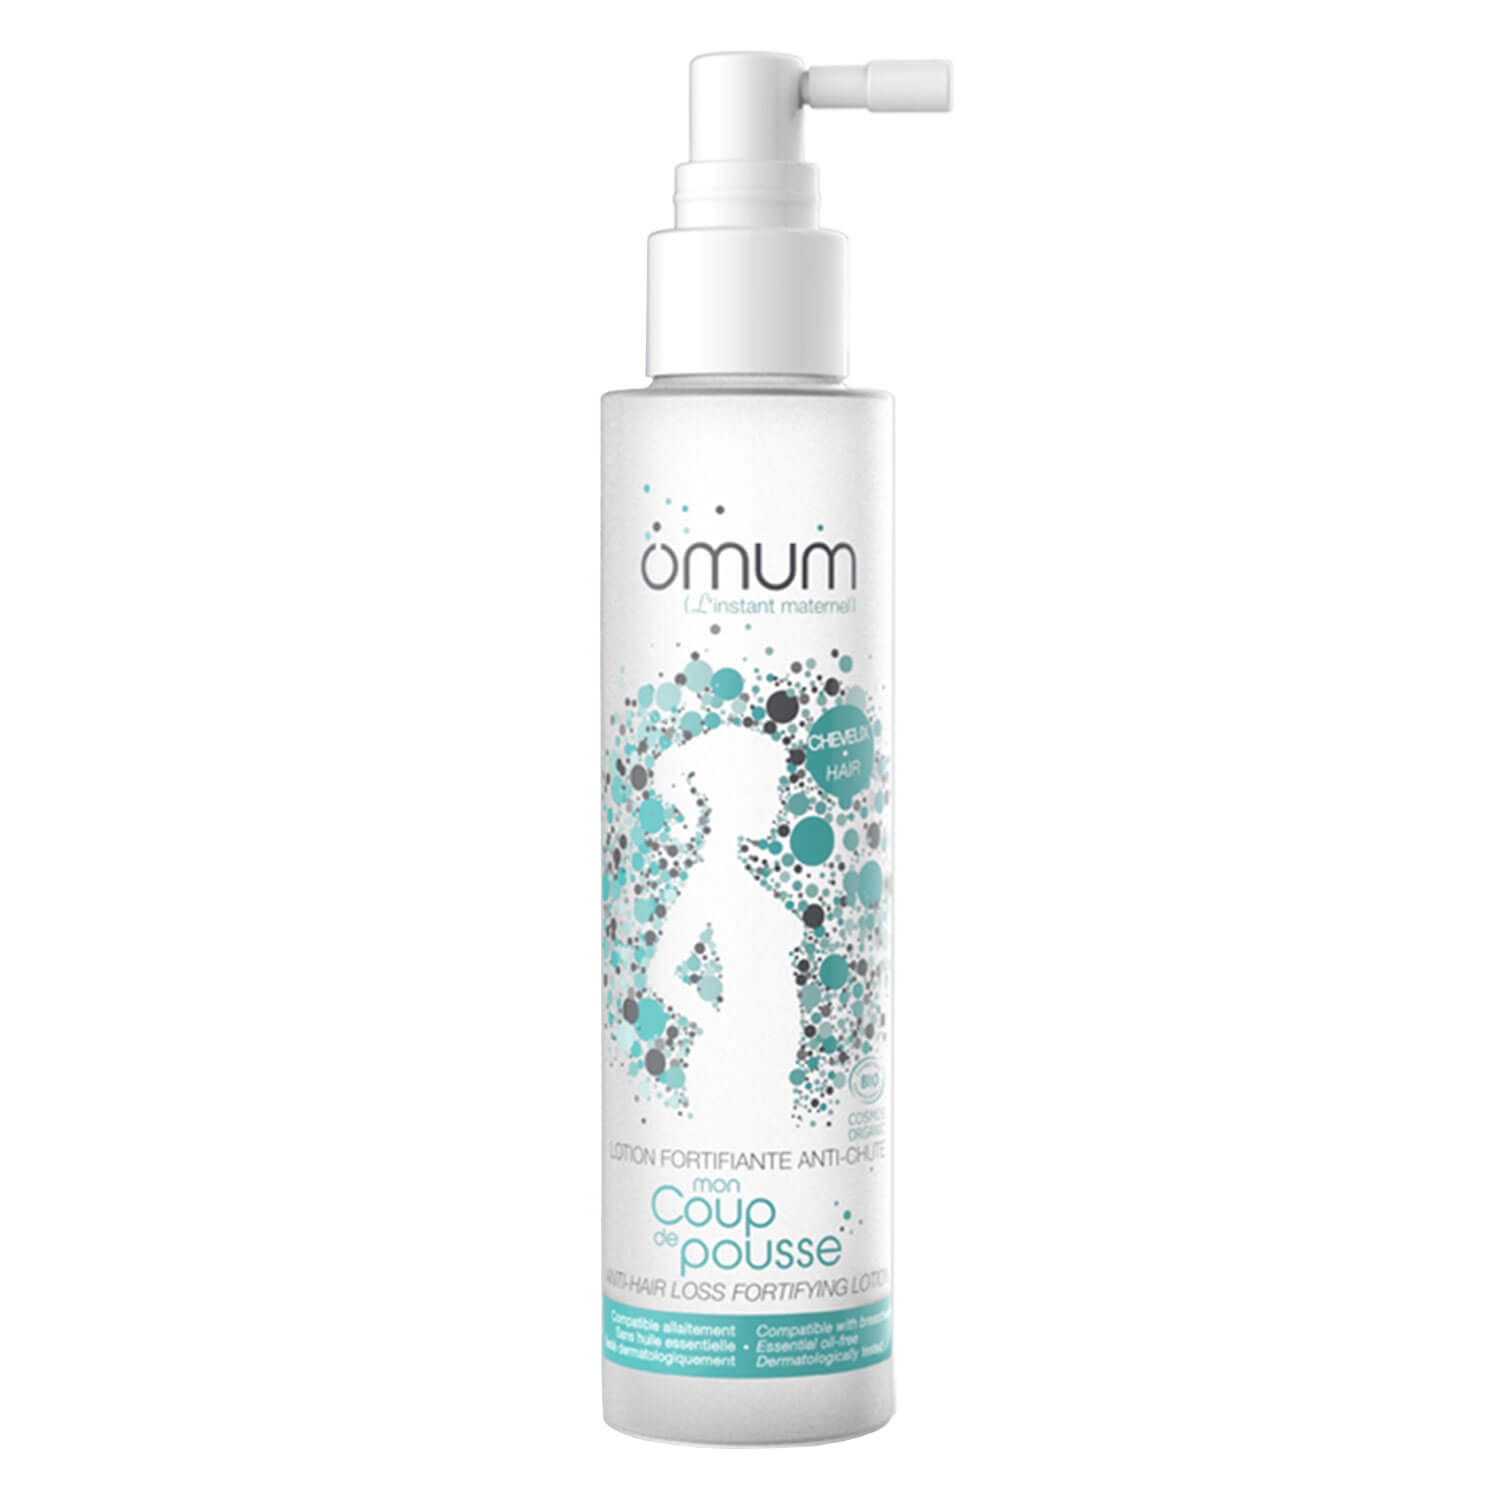 Product image from omum - Mon Coup de Pousse Anti-Hair Loss Fortifying Lotion